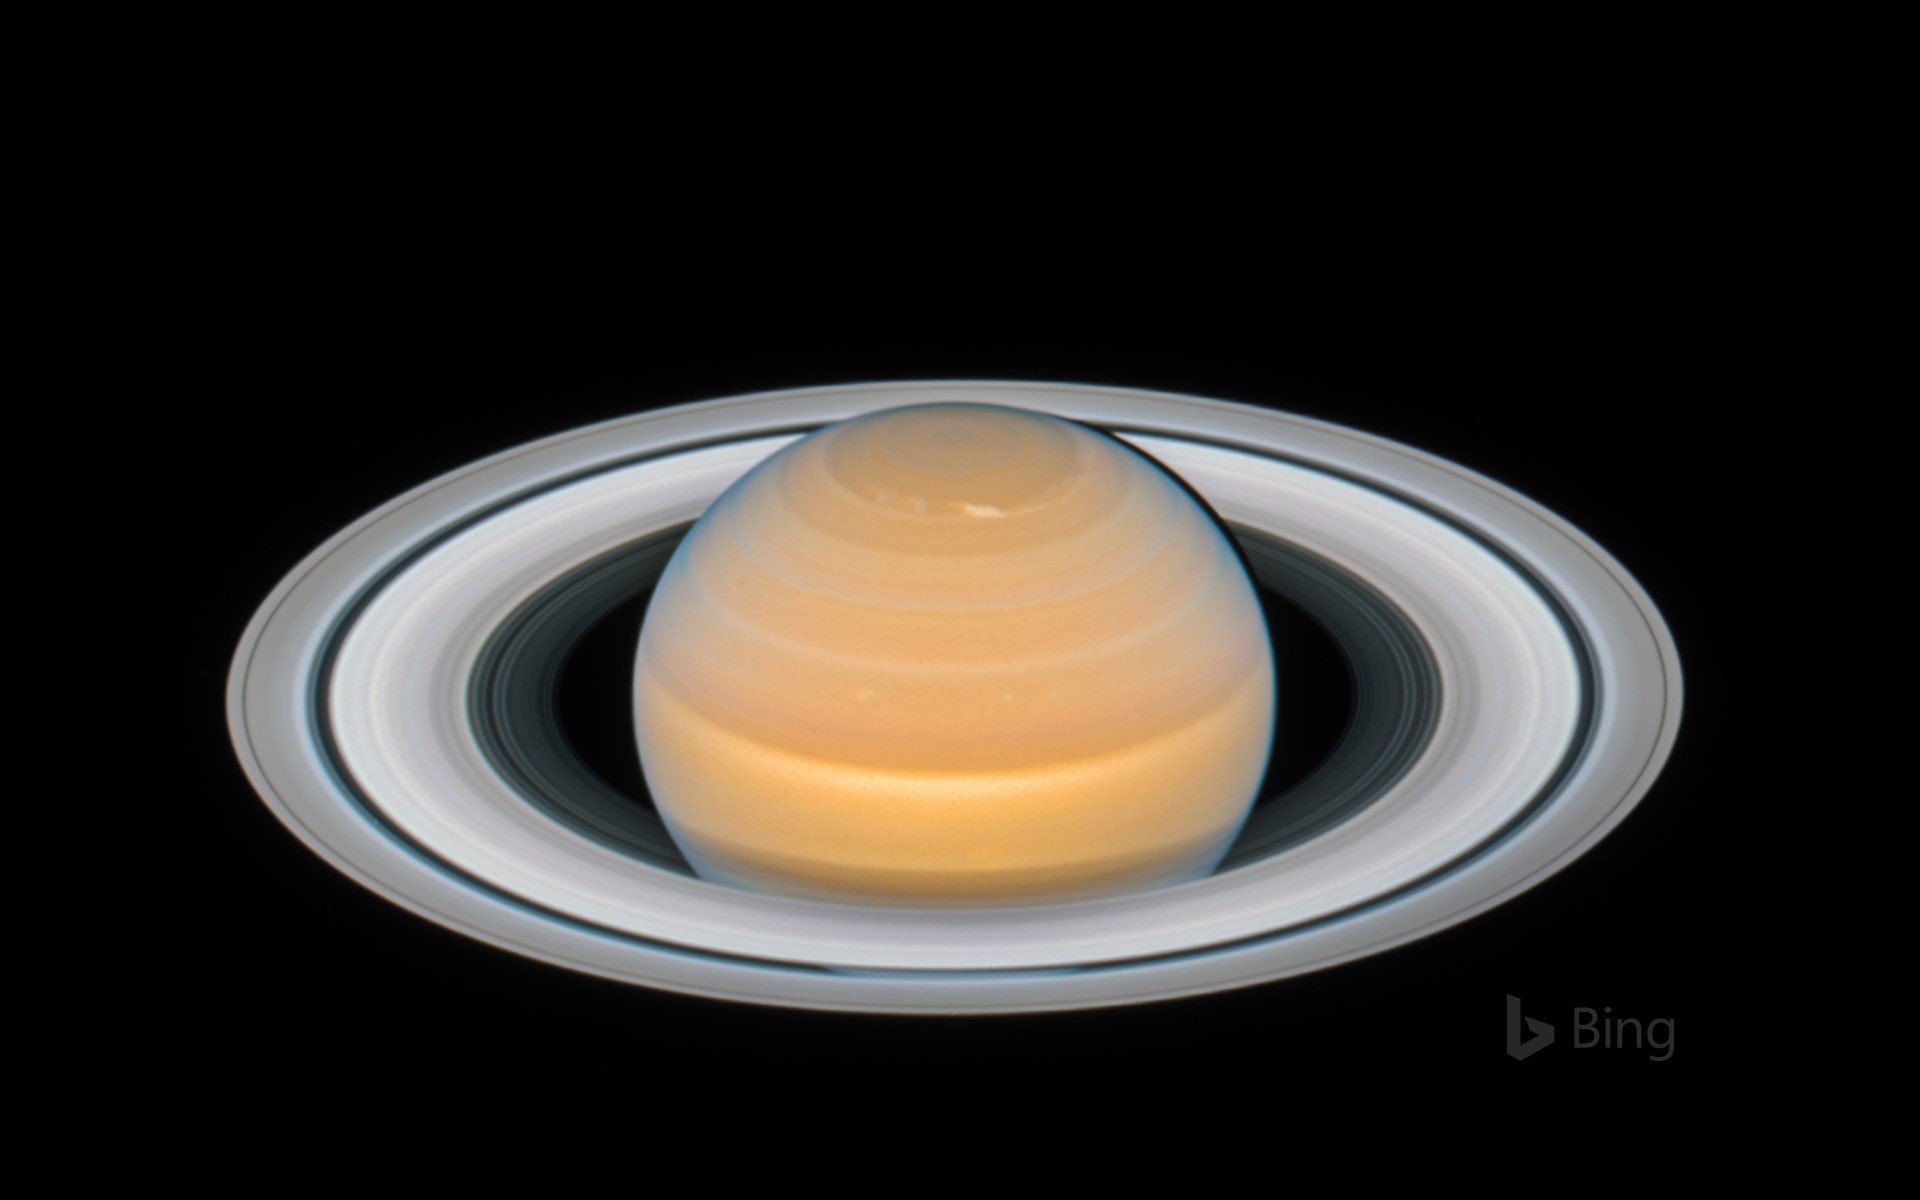 Hubble Space Telescope’s view of Saturn